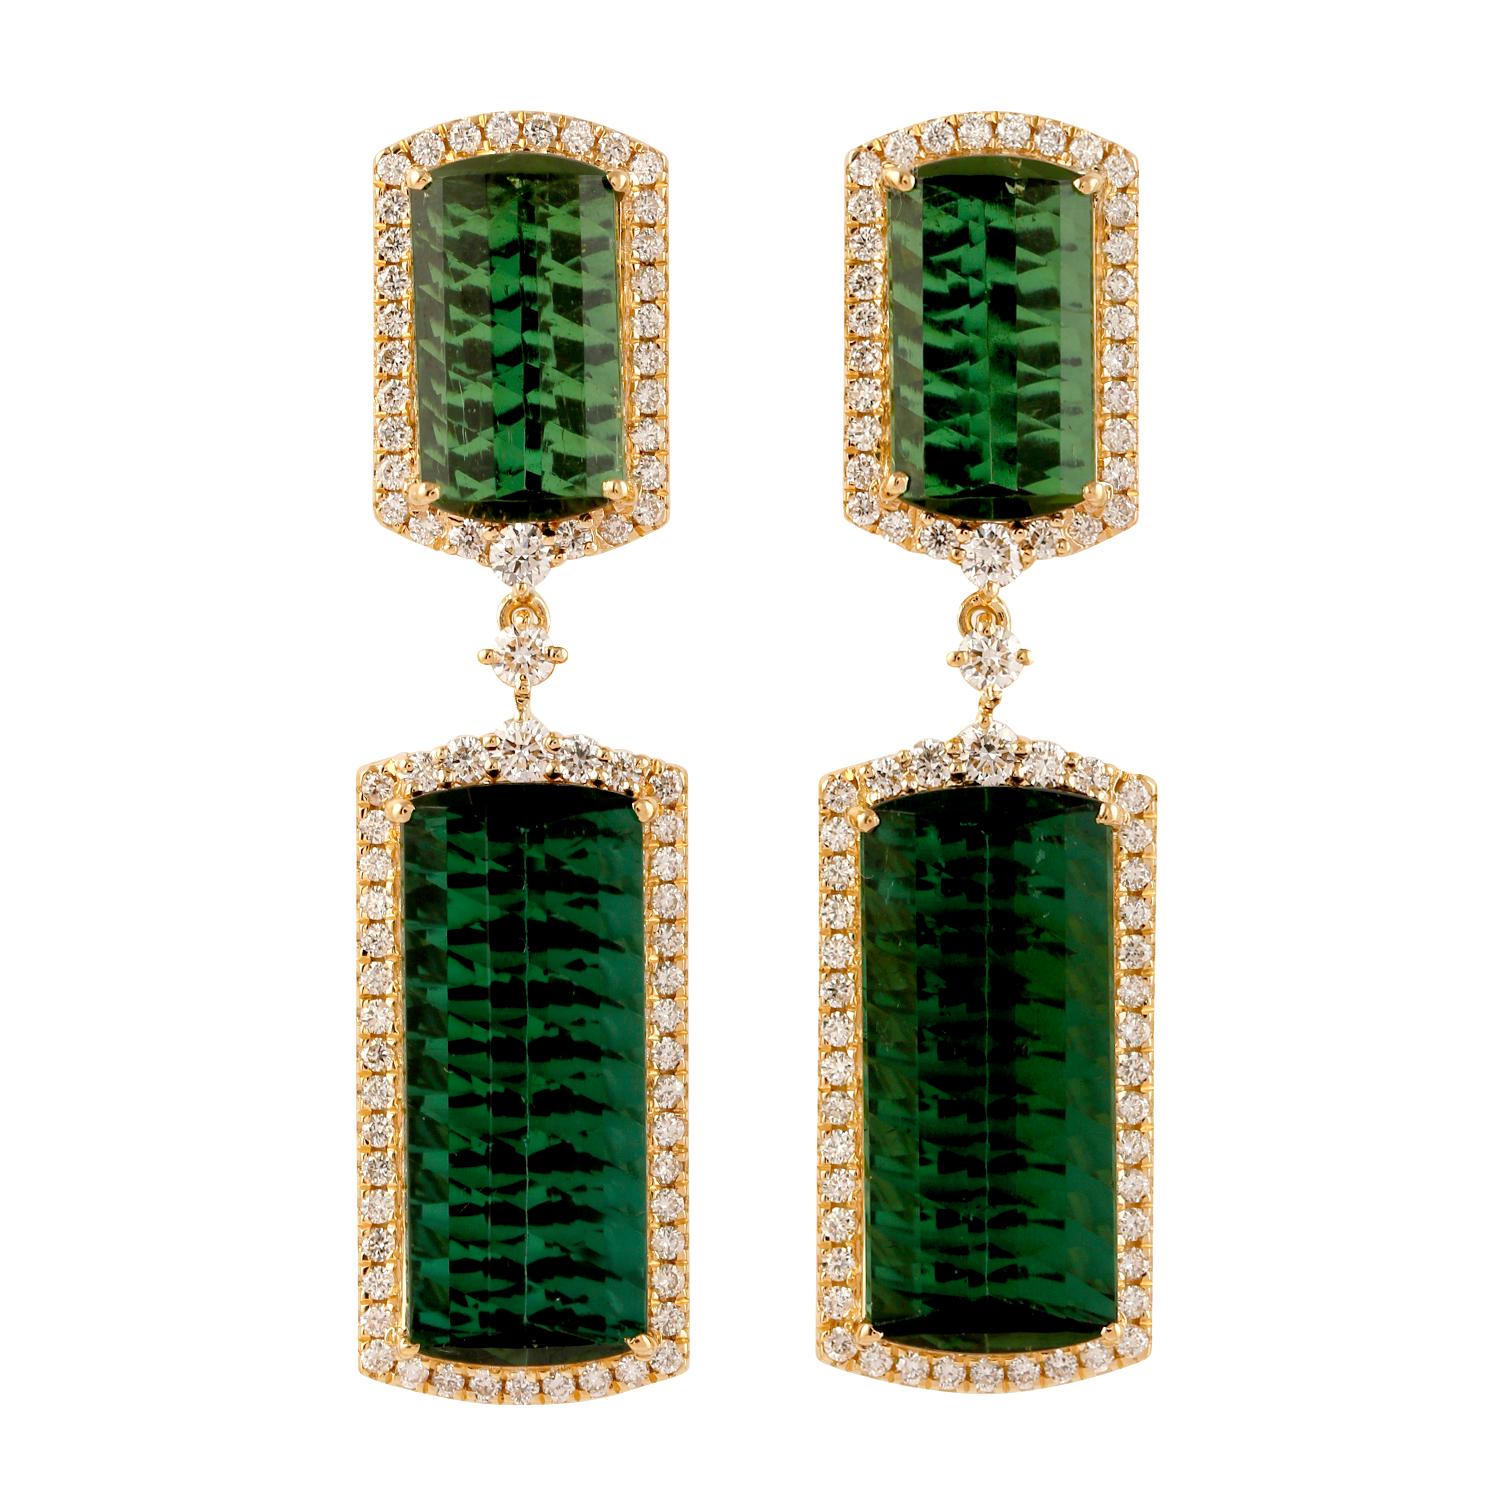 Vivid Green Tourmaline Dangle Earrings With Diamonds Made In 18k Yellow Gold For Sale 1